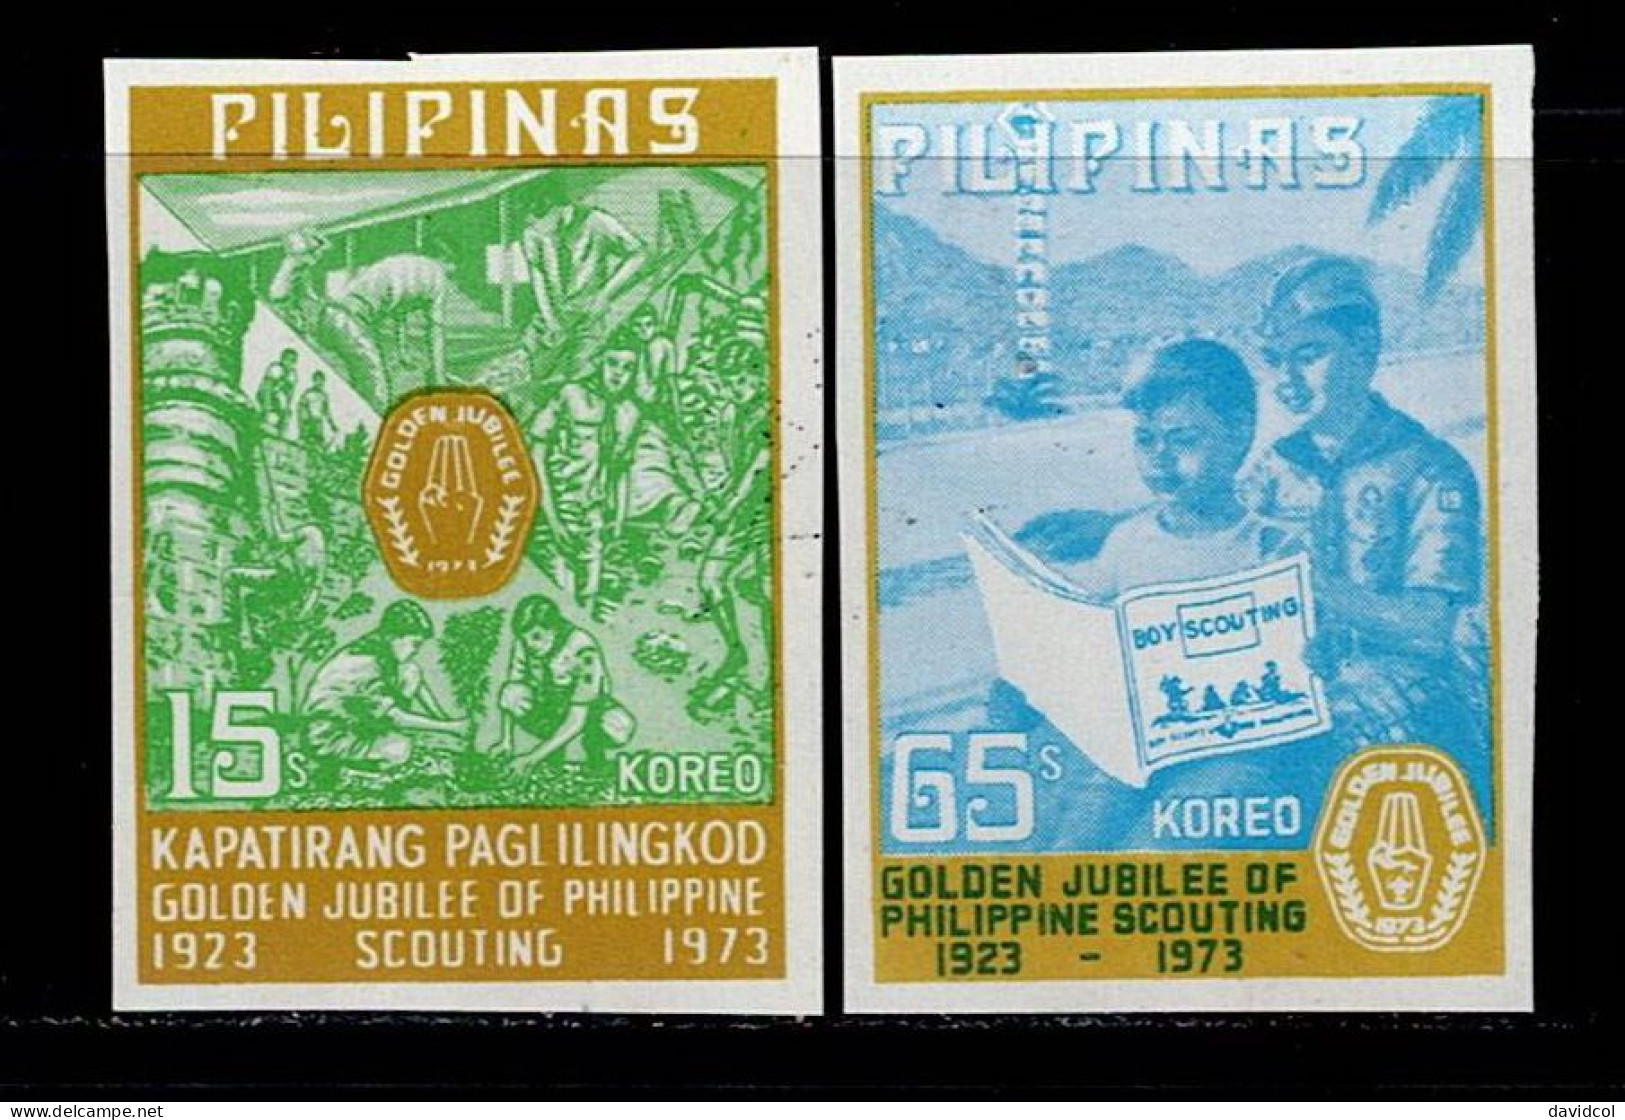 FIL-05- PHILIPPINES - 1973 - MNH -SCOUTS- IMPERFORATE- GOLDEN JUBILEE OF PHILIPPINE SCOUTING - Filipinas